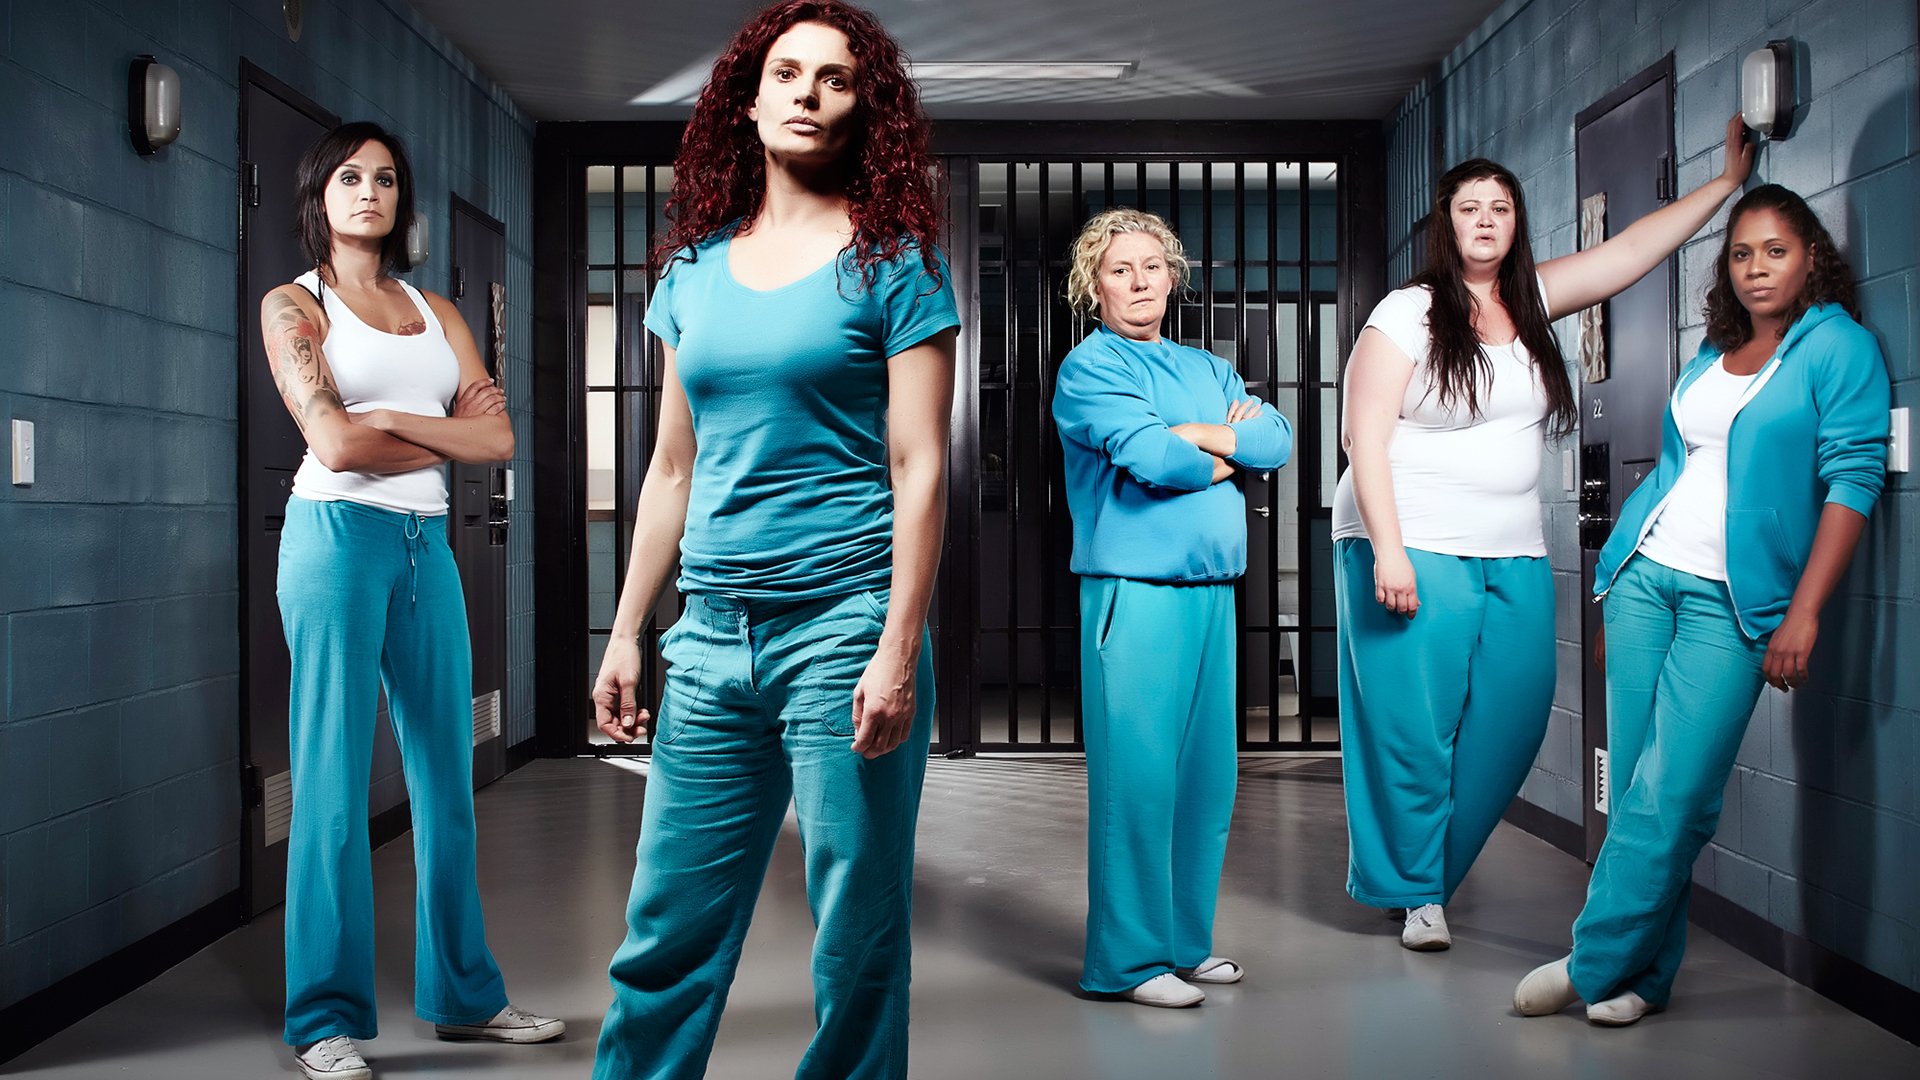 Wentworth Prison - Rotten Tomatoes